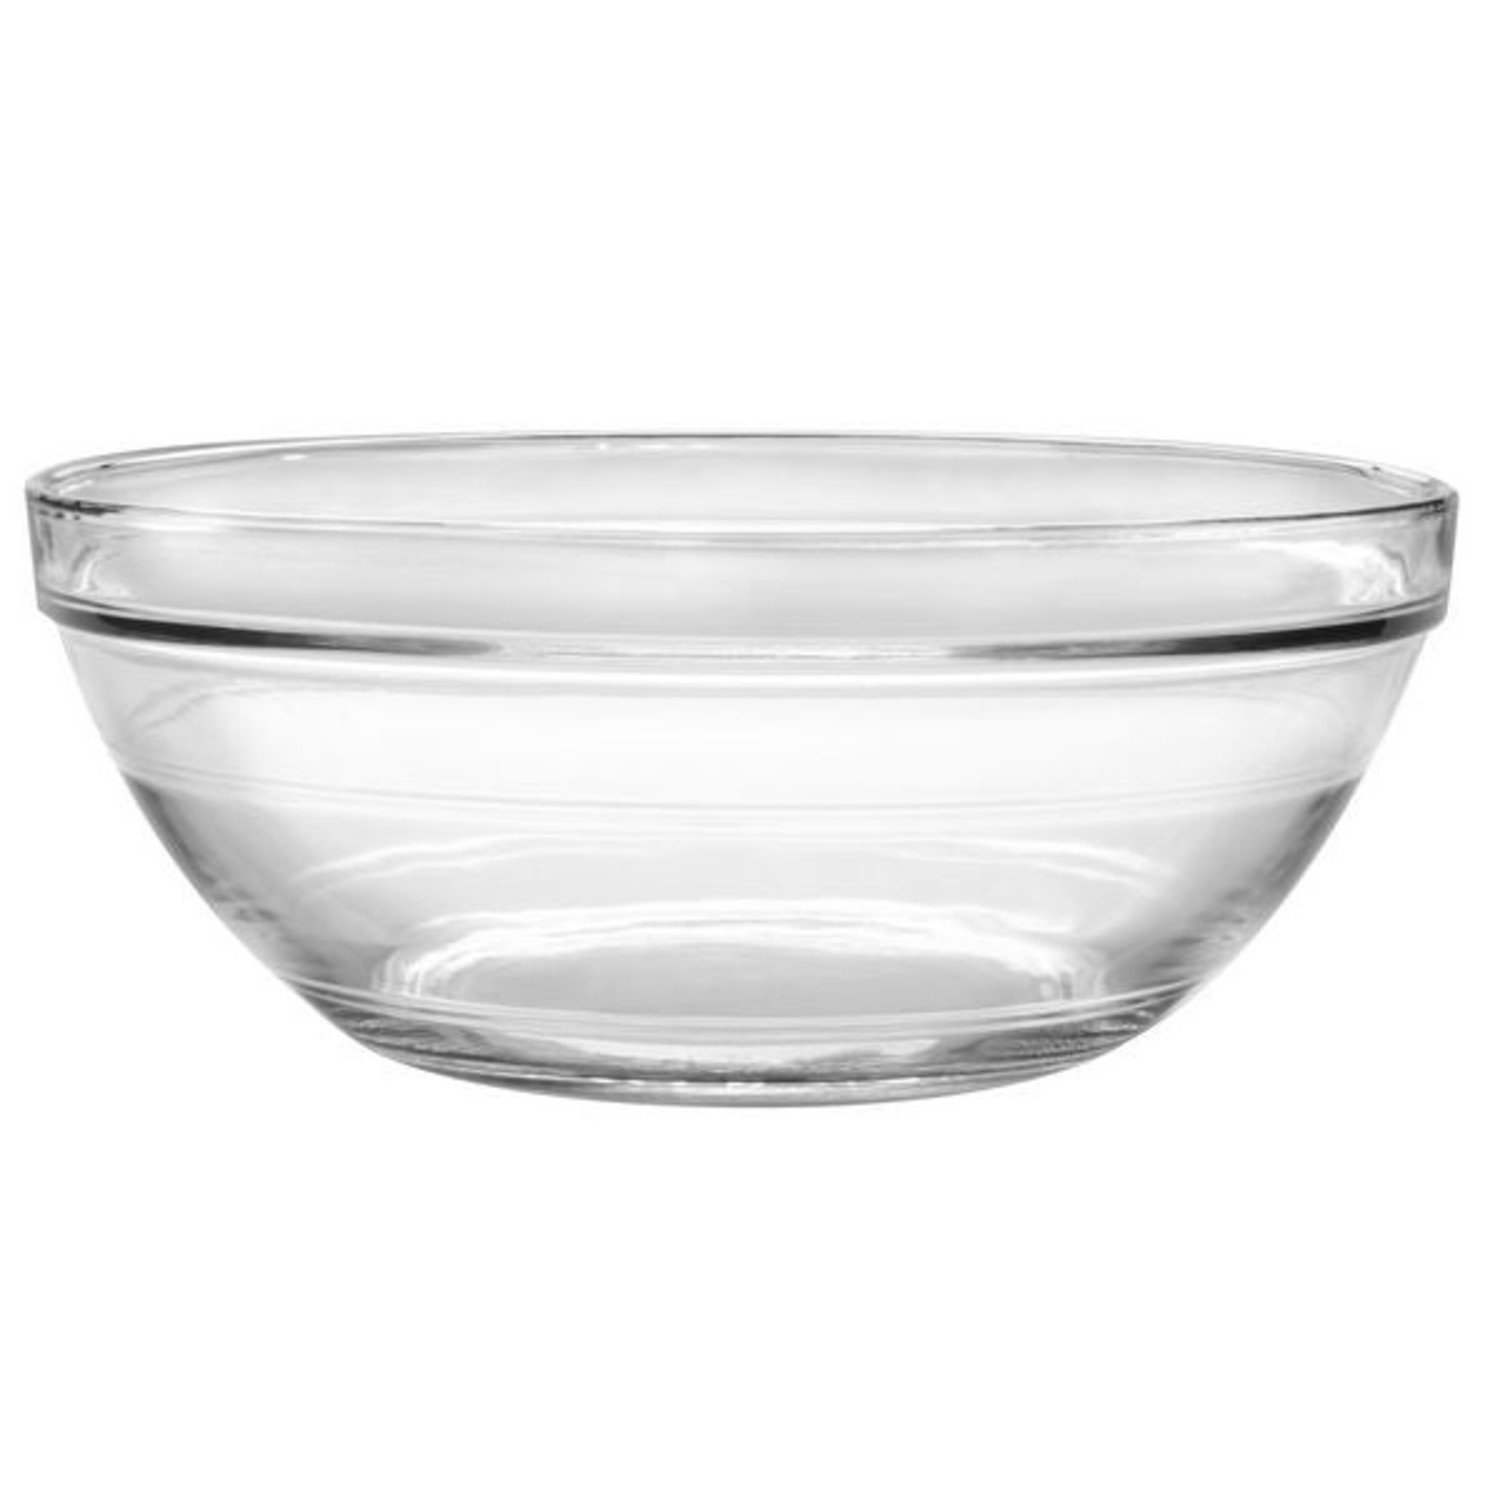 Glass Mixing Bowls with Lids Set of 3 - Large Kitchen Salad Space